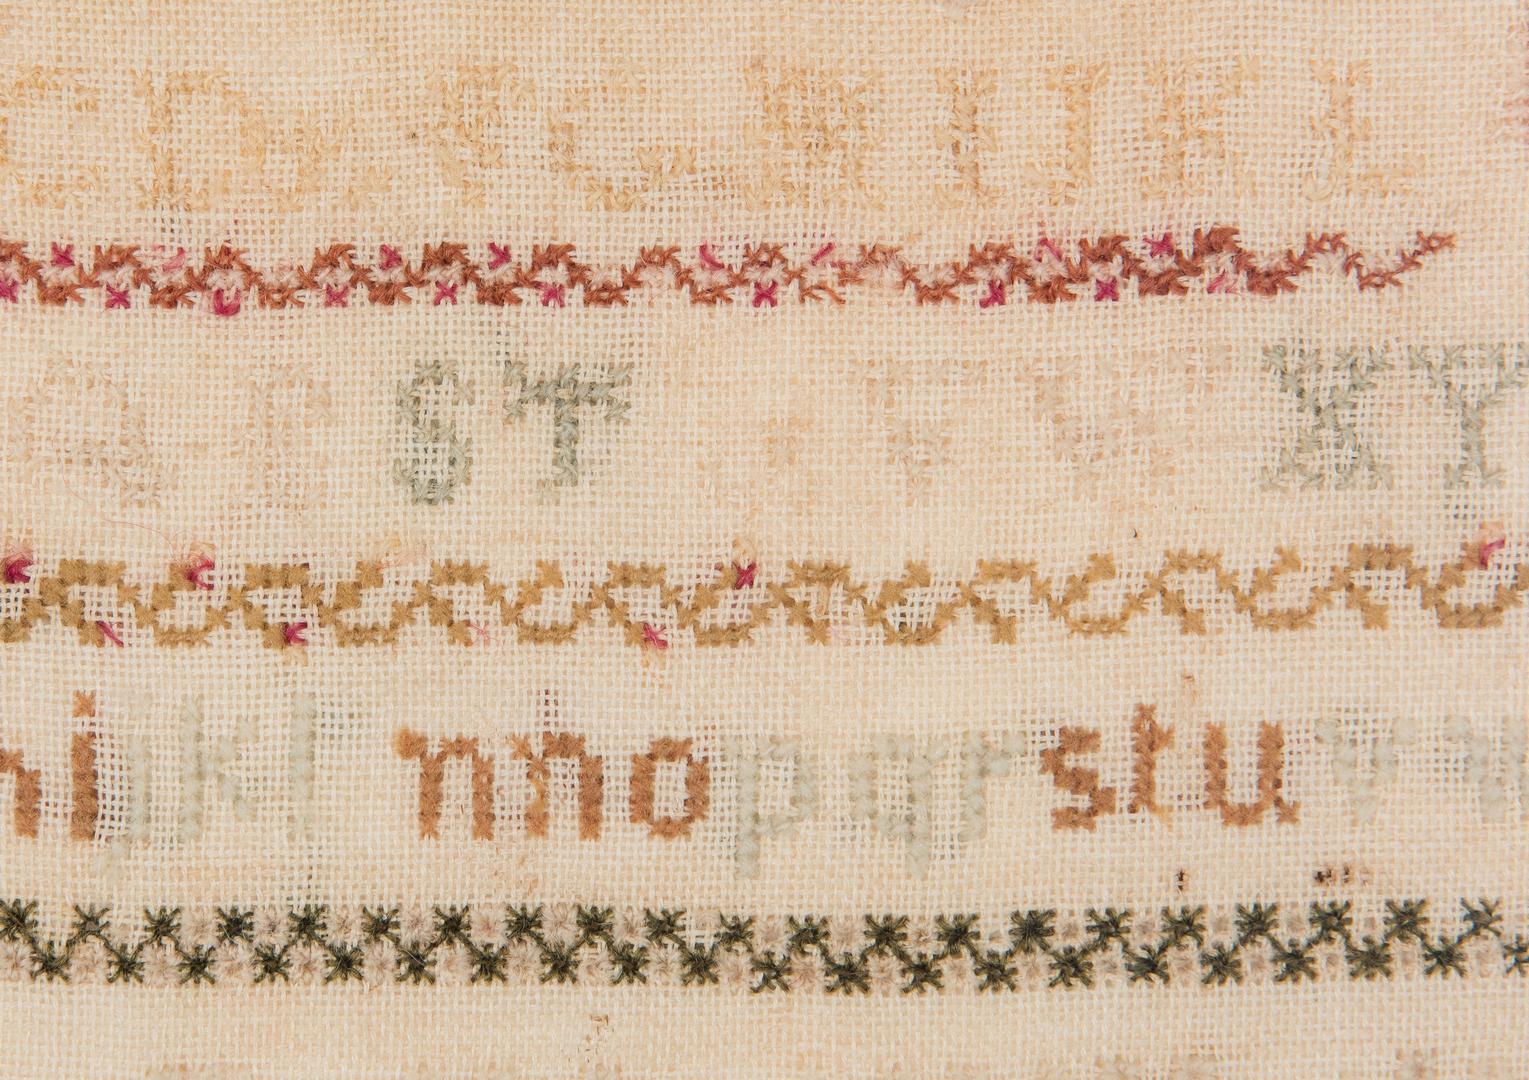 Lot 896: 2 19th Cent. Textiles, incl. Sampler, Silk Embroidery